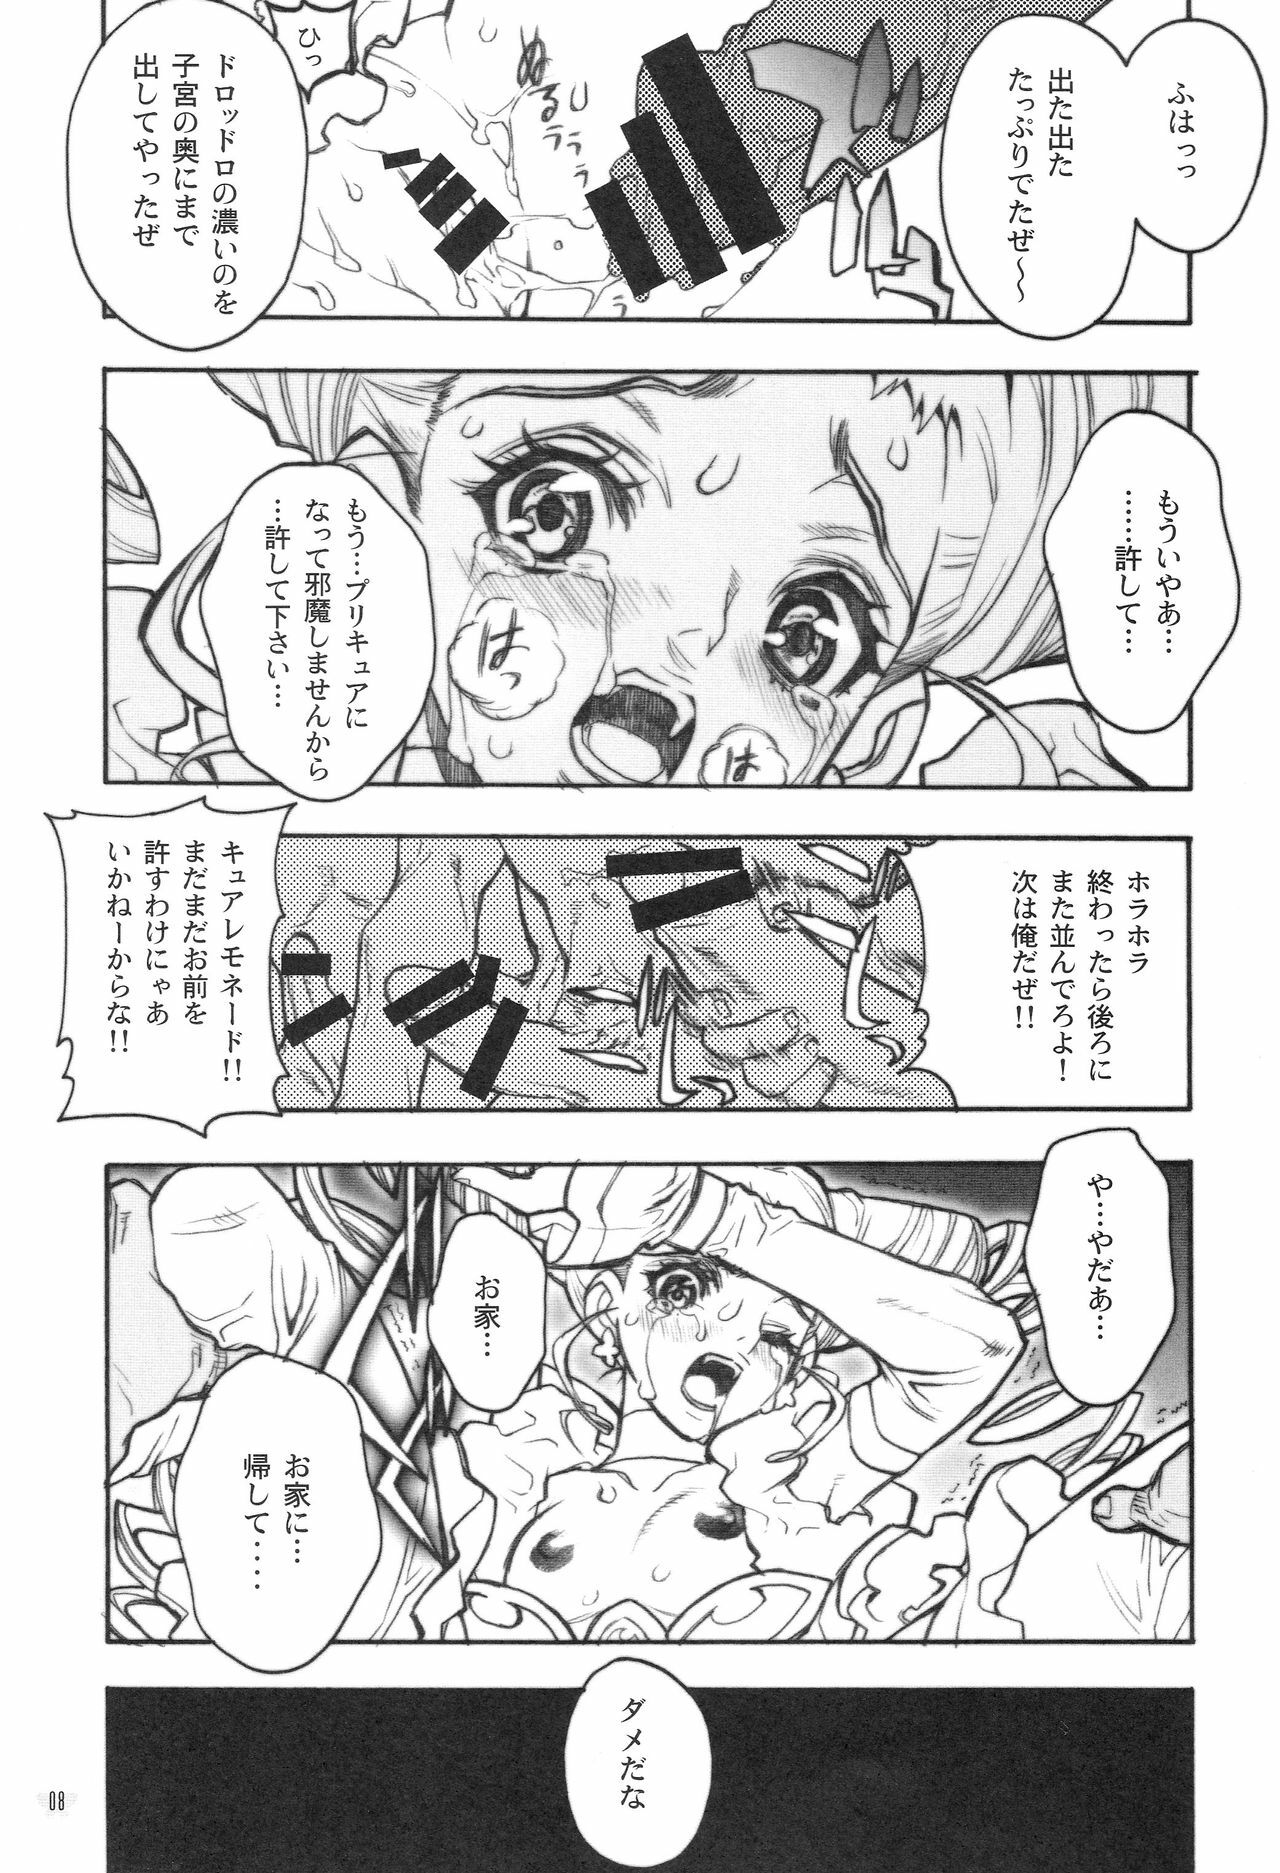 [Piggstar (Nagoya Shachihachi)] Candy Vol.2 taste yellow (Yes! Precure 5) page 5 full